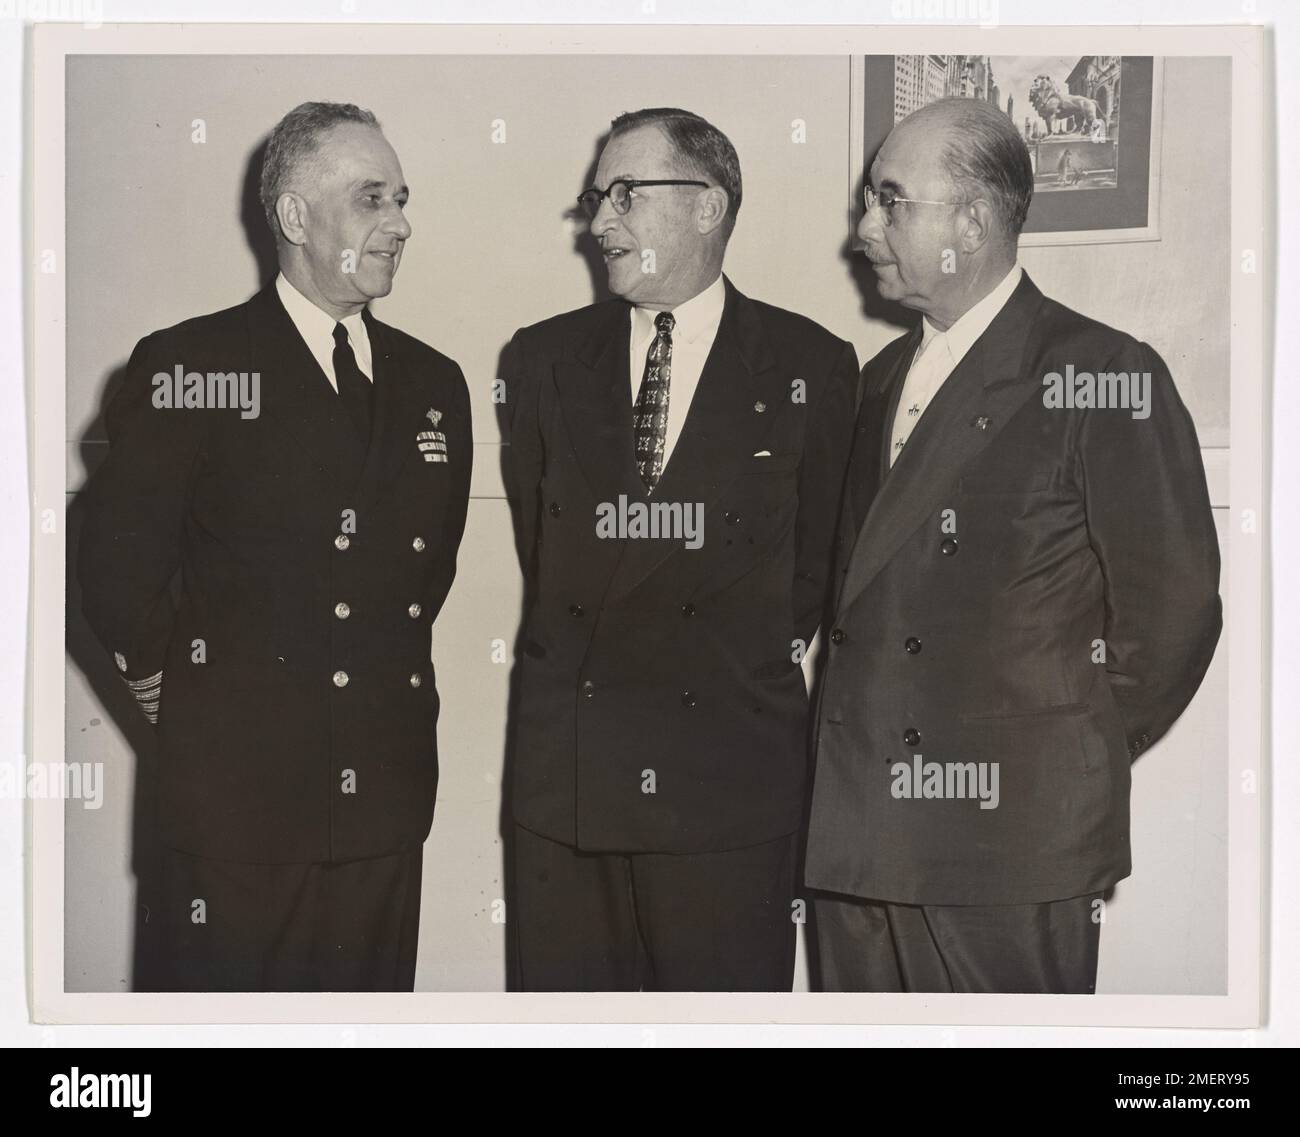 Captain Frank A. Leamy and newly appointed officers of the 8th Coast Guard District Auxiliary. Future plans of the Coast Guard Auxiliary are discussed by Captain Frank A. Leamy (left), USCG, Commander, 8th Coast Guard District, and newly appointed officers of the 8th Coast Guard District Auxiliary. Next to Captain Leamy stands L. J. Trudeau who was sworn in as Commodore of the 8th District Auxiliary, and Dr. J. W. Rosenthal who became Captain of Division #4. The two new officers, both native sons of the Crescent City, were administered their oath's of office during the District Auxiliary's Ins Stock Photo